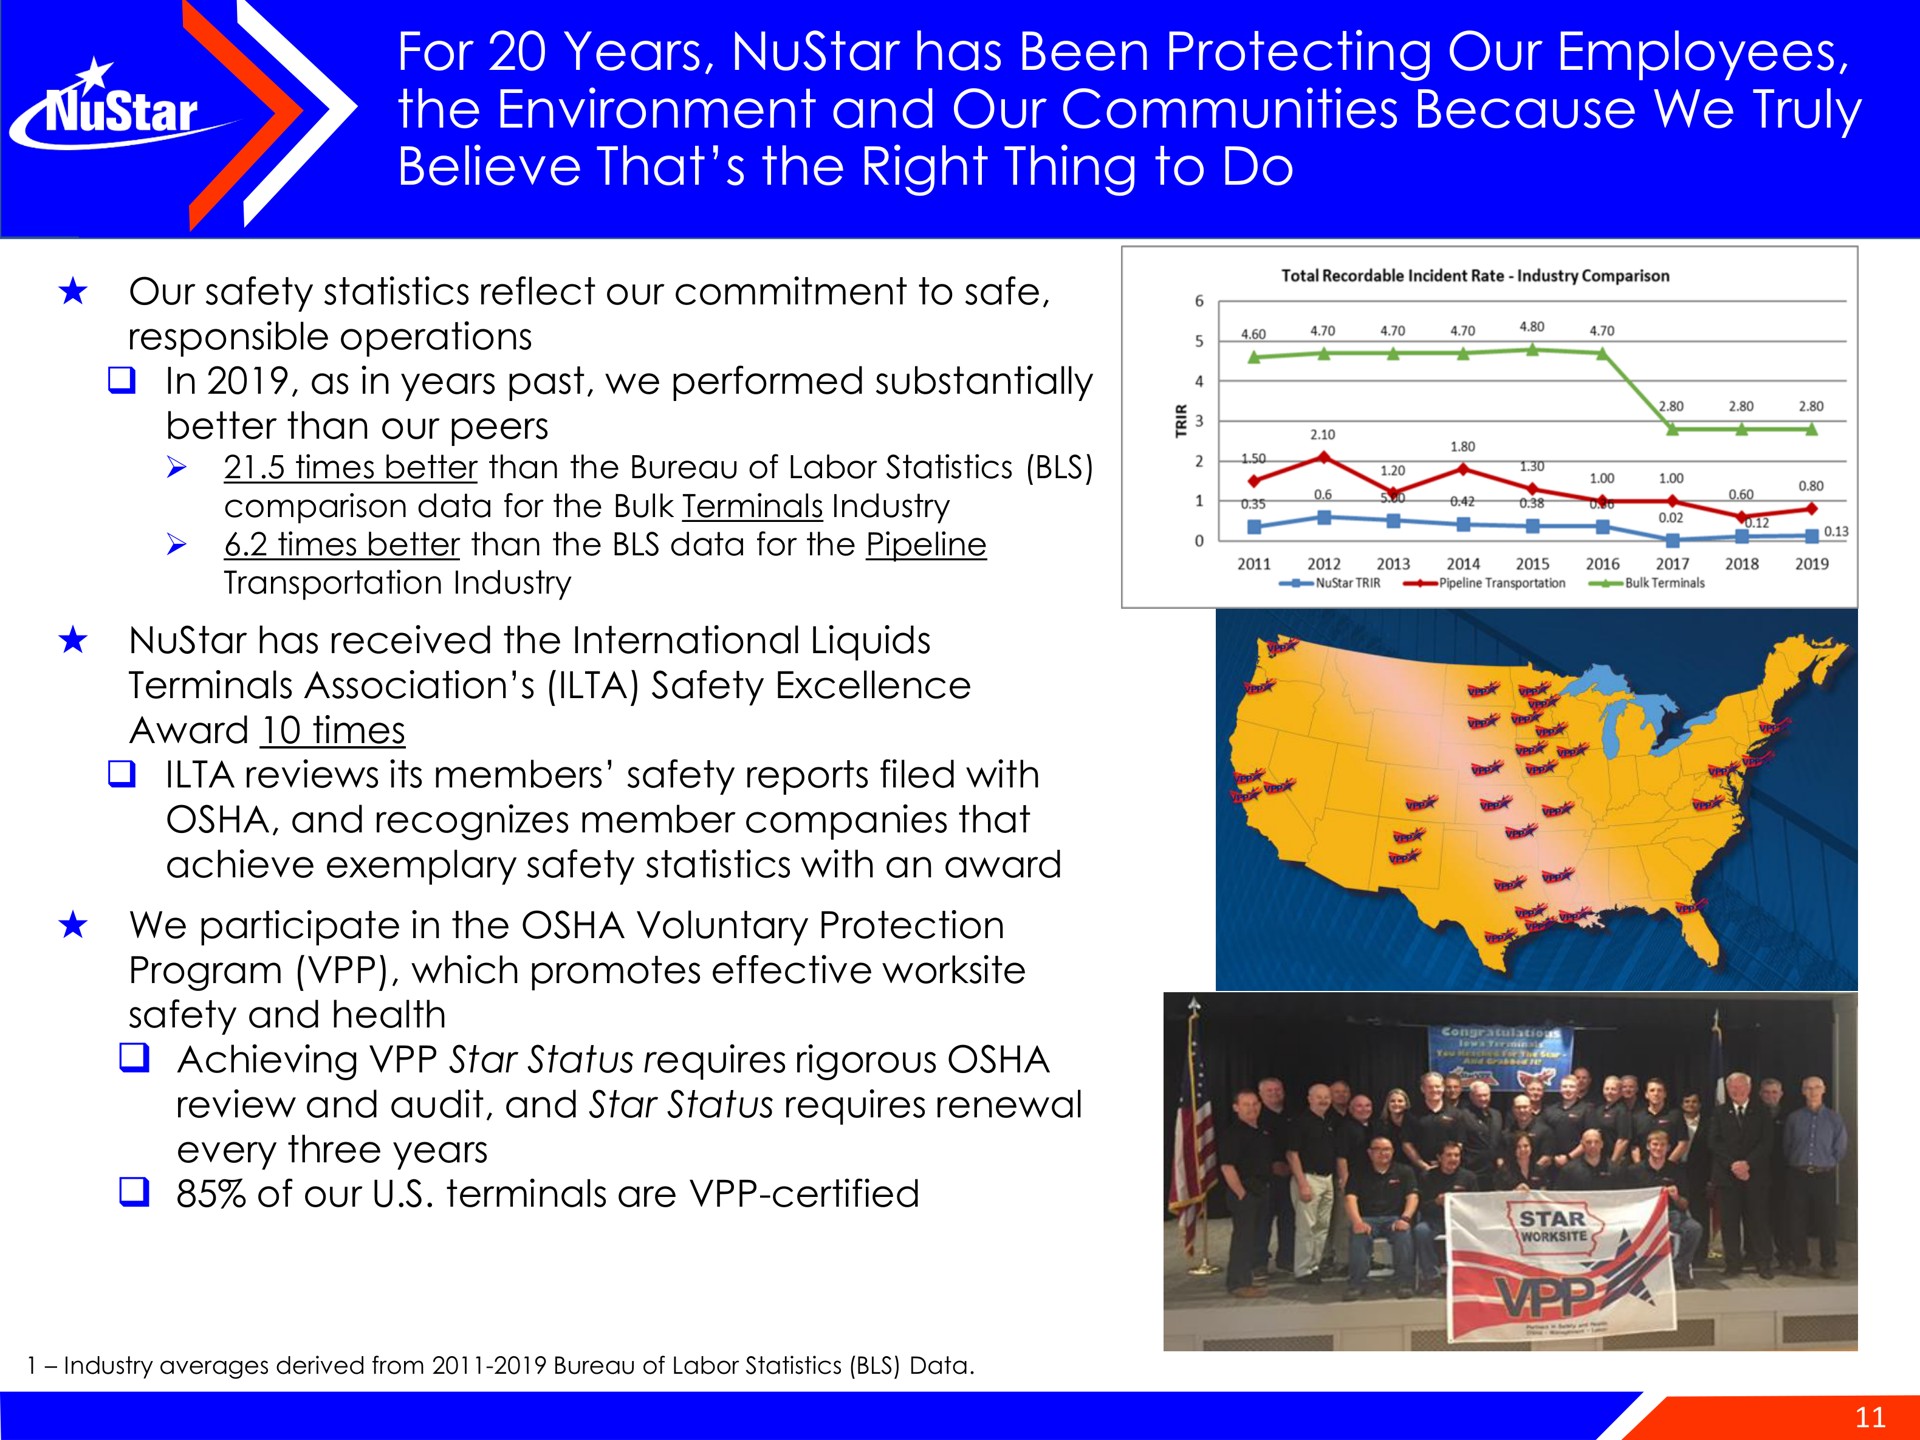 for years has been protecting our employees the environment and our communities because we truly believe that the right thing to do | NuStar Energy